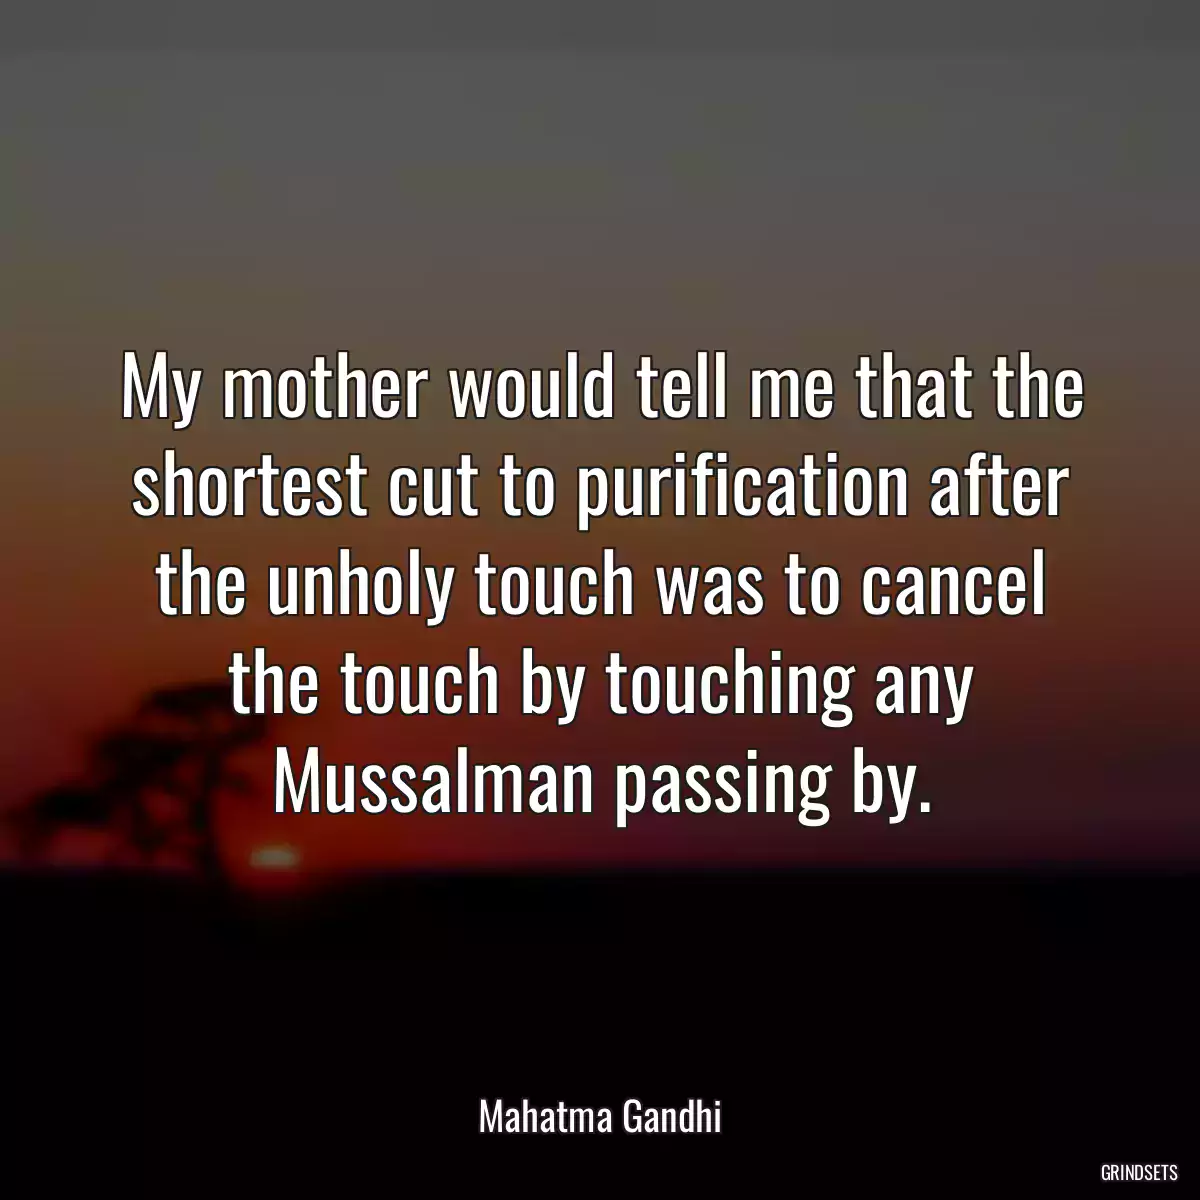 My mother would tell me that the shortest cut to purification after the unholy touch was to cancel the touch by touching any Mussalman passing by.